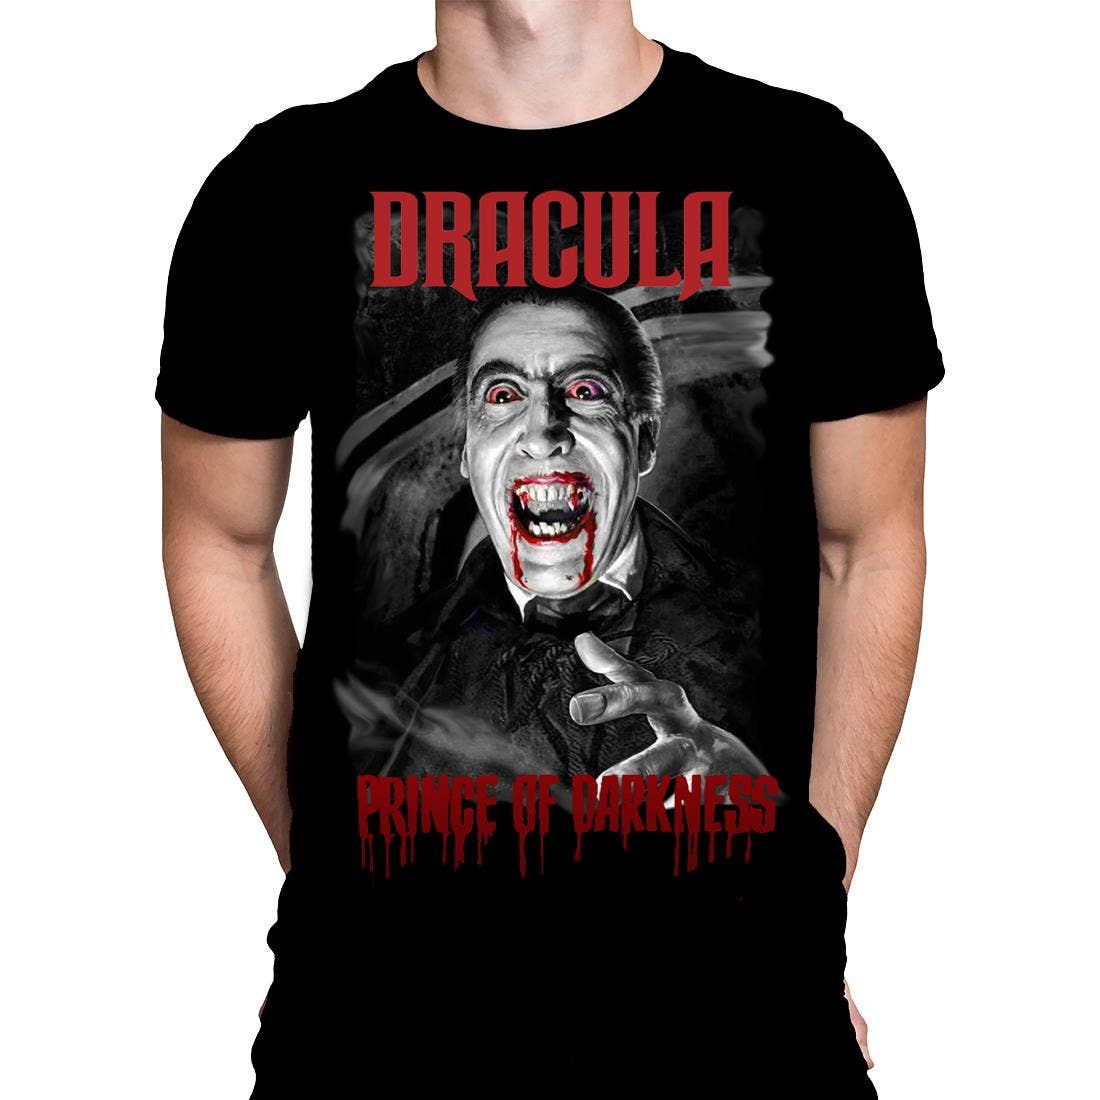 Visceral image of Christopher Lee as the vampire Count in the 1966 Hammer Film "Dracula: Prince of Darkness" in white, grey, black, and red on black t-shirt, shown on model